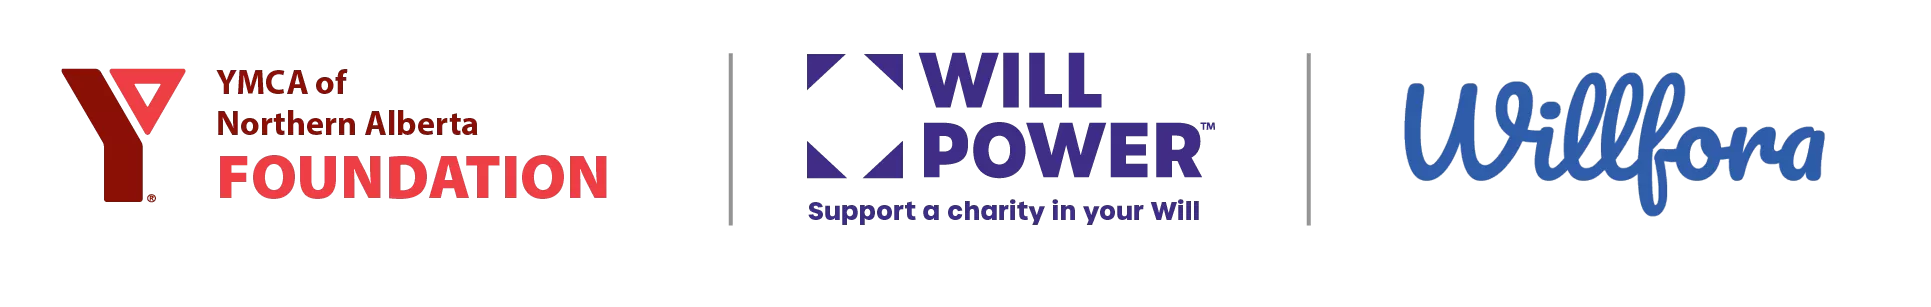 YMCA of Northern Alberta Foundation, Will Power, and Willfora